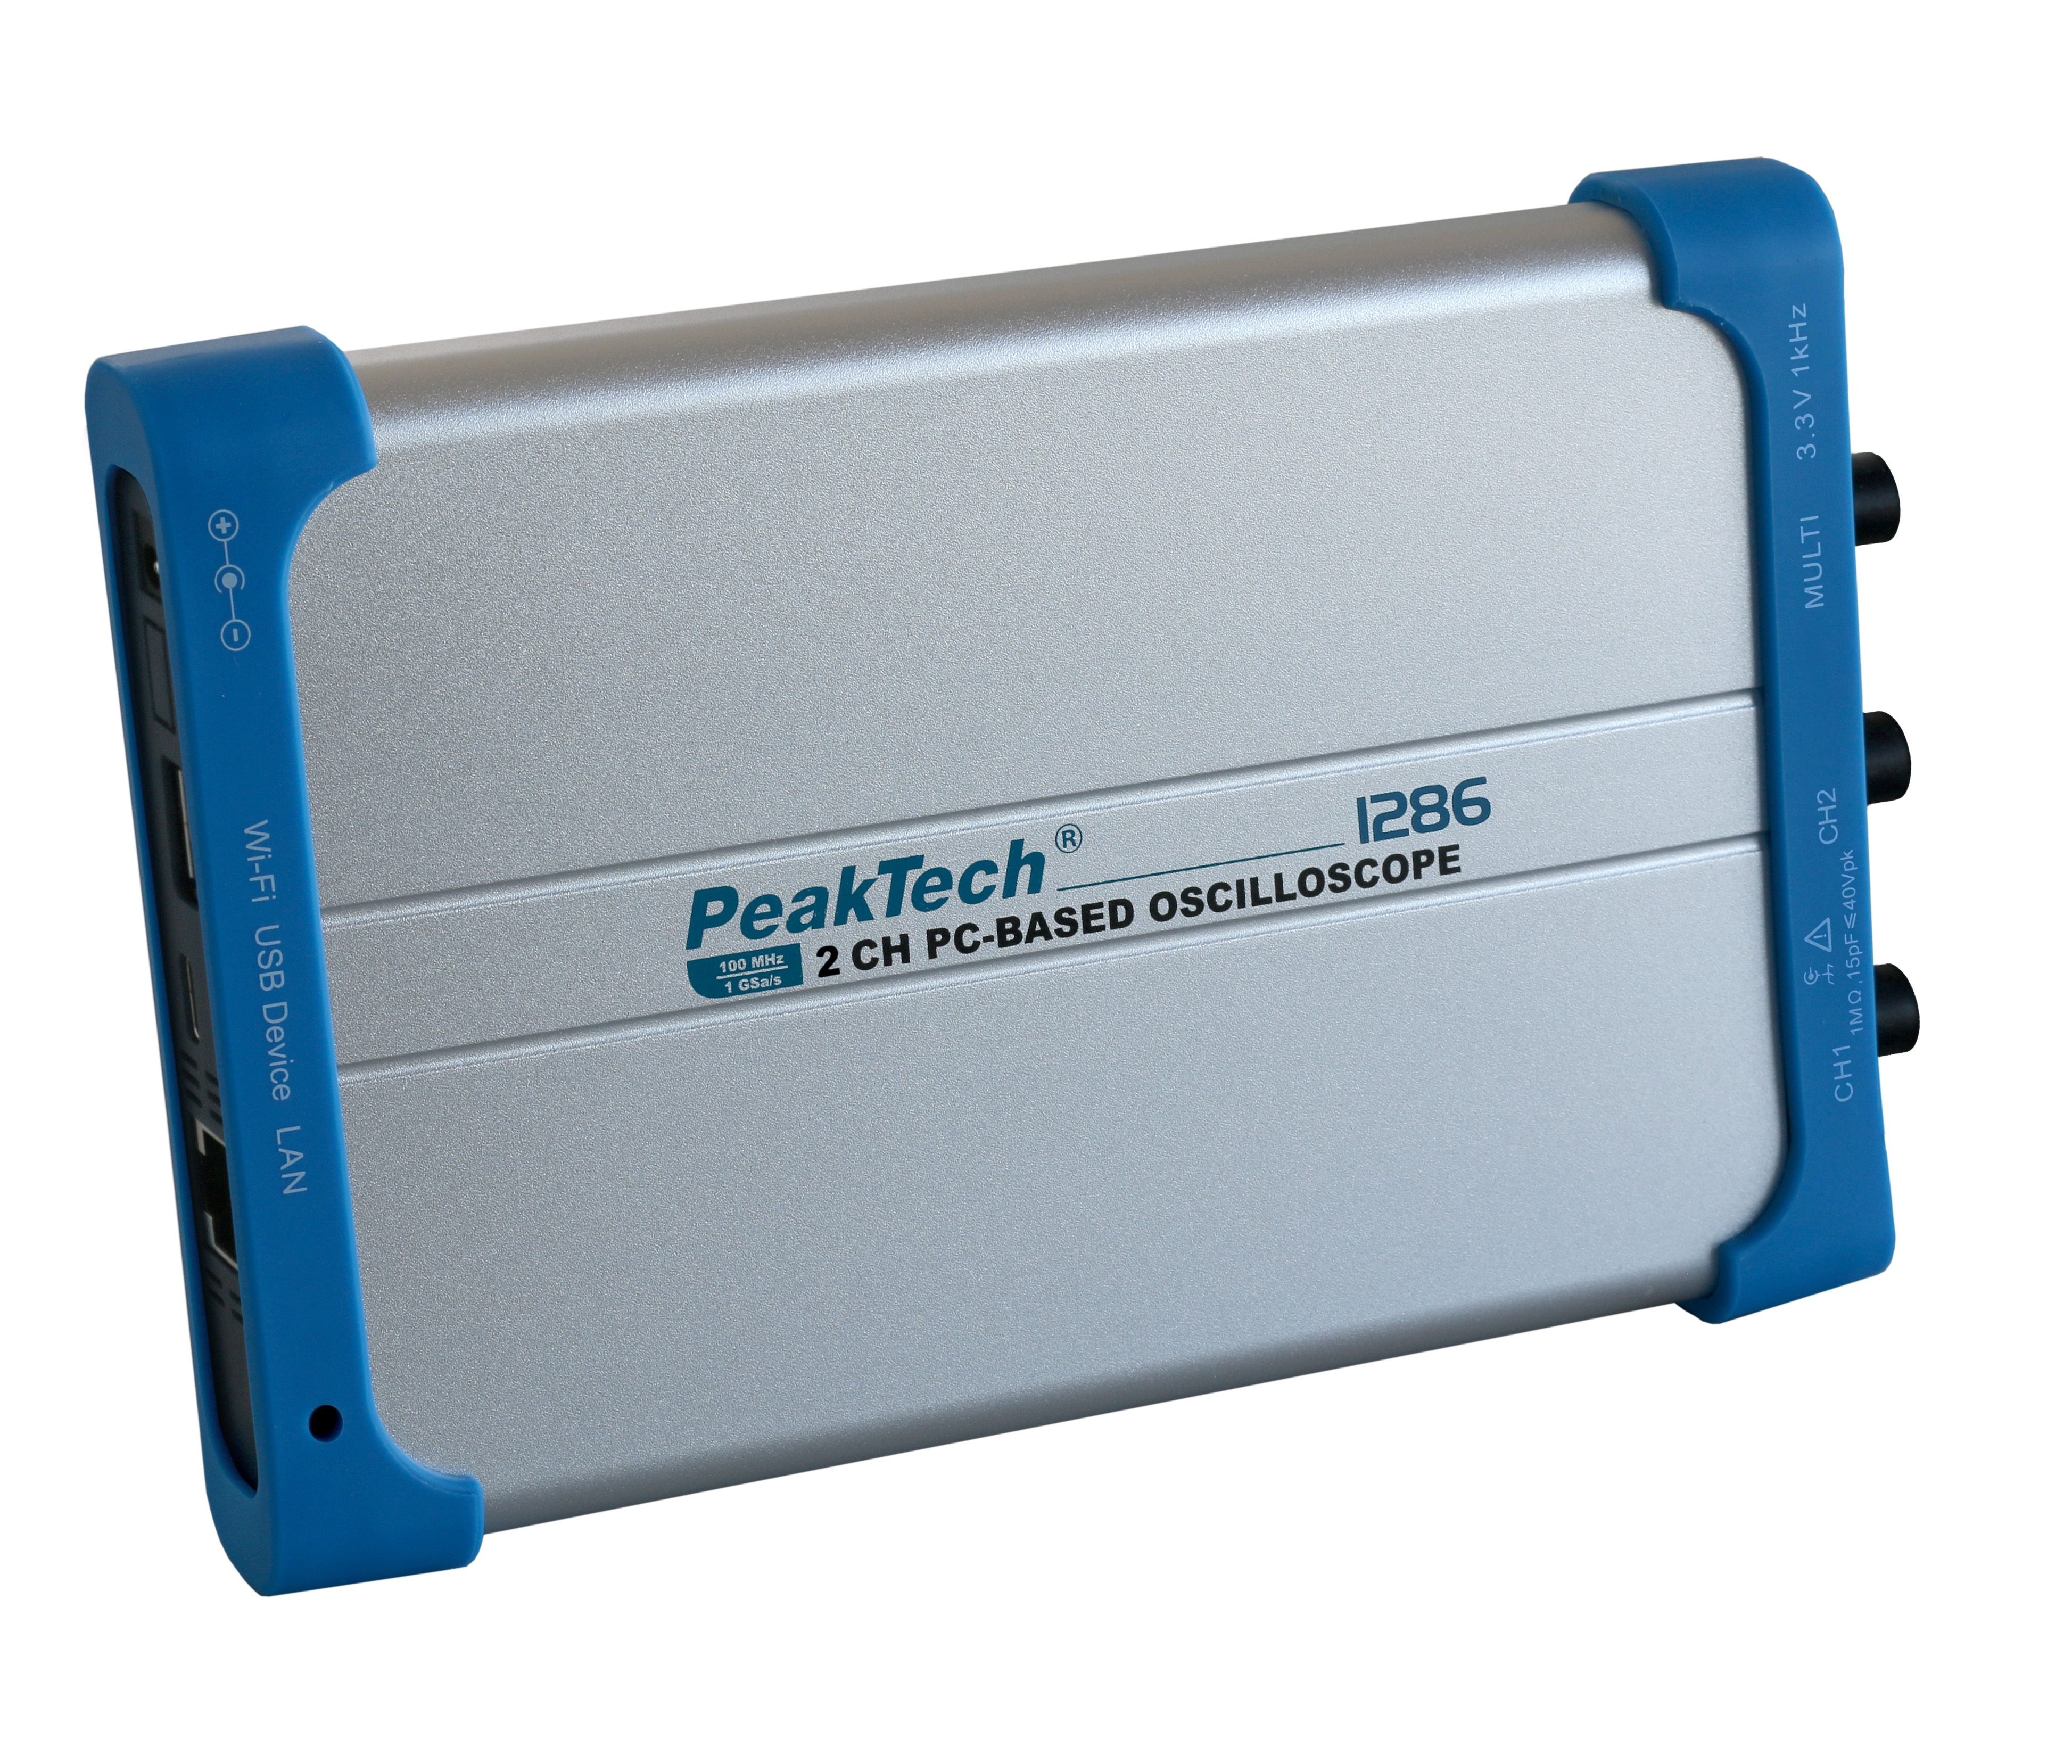 «PeakTech® P 1286» 100 MHz/2 CH, 1 GS/s PC oscilloscope with USB&LAN